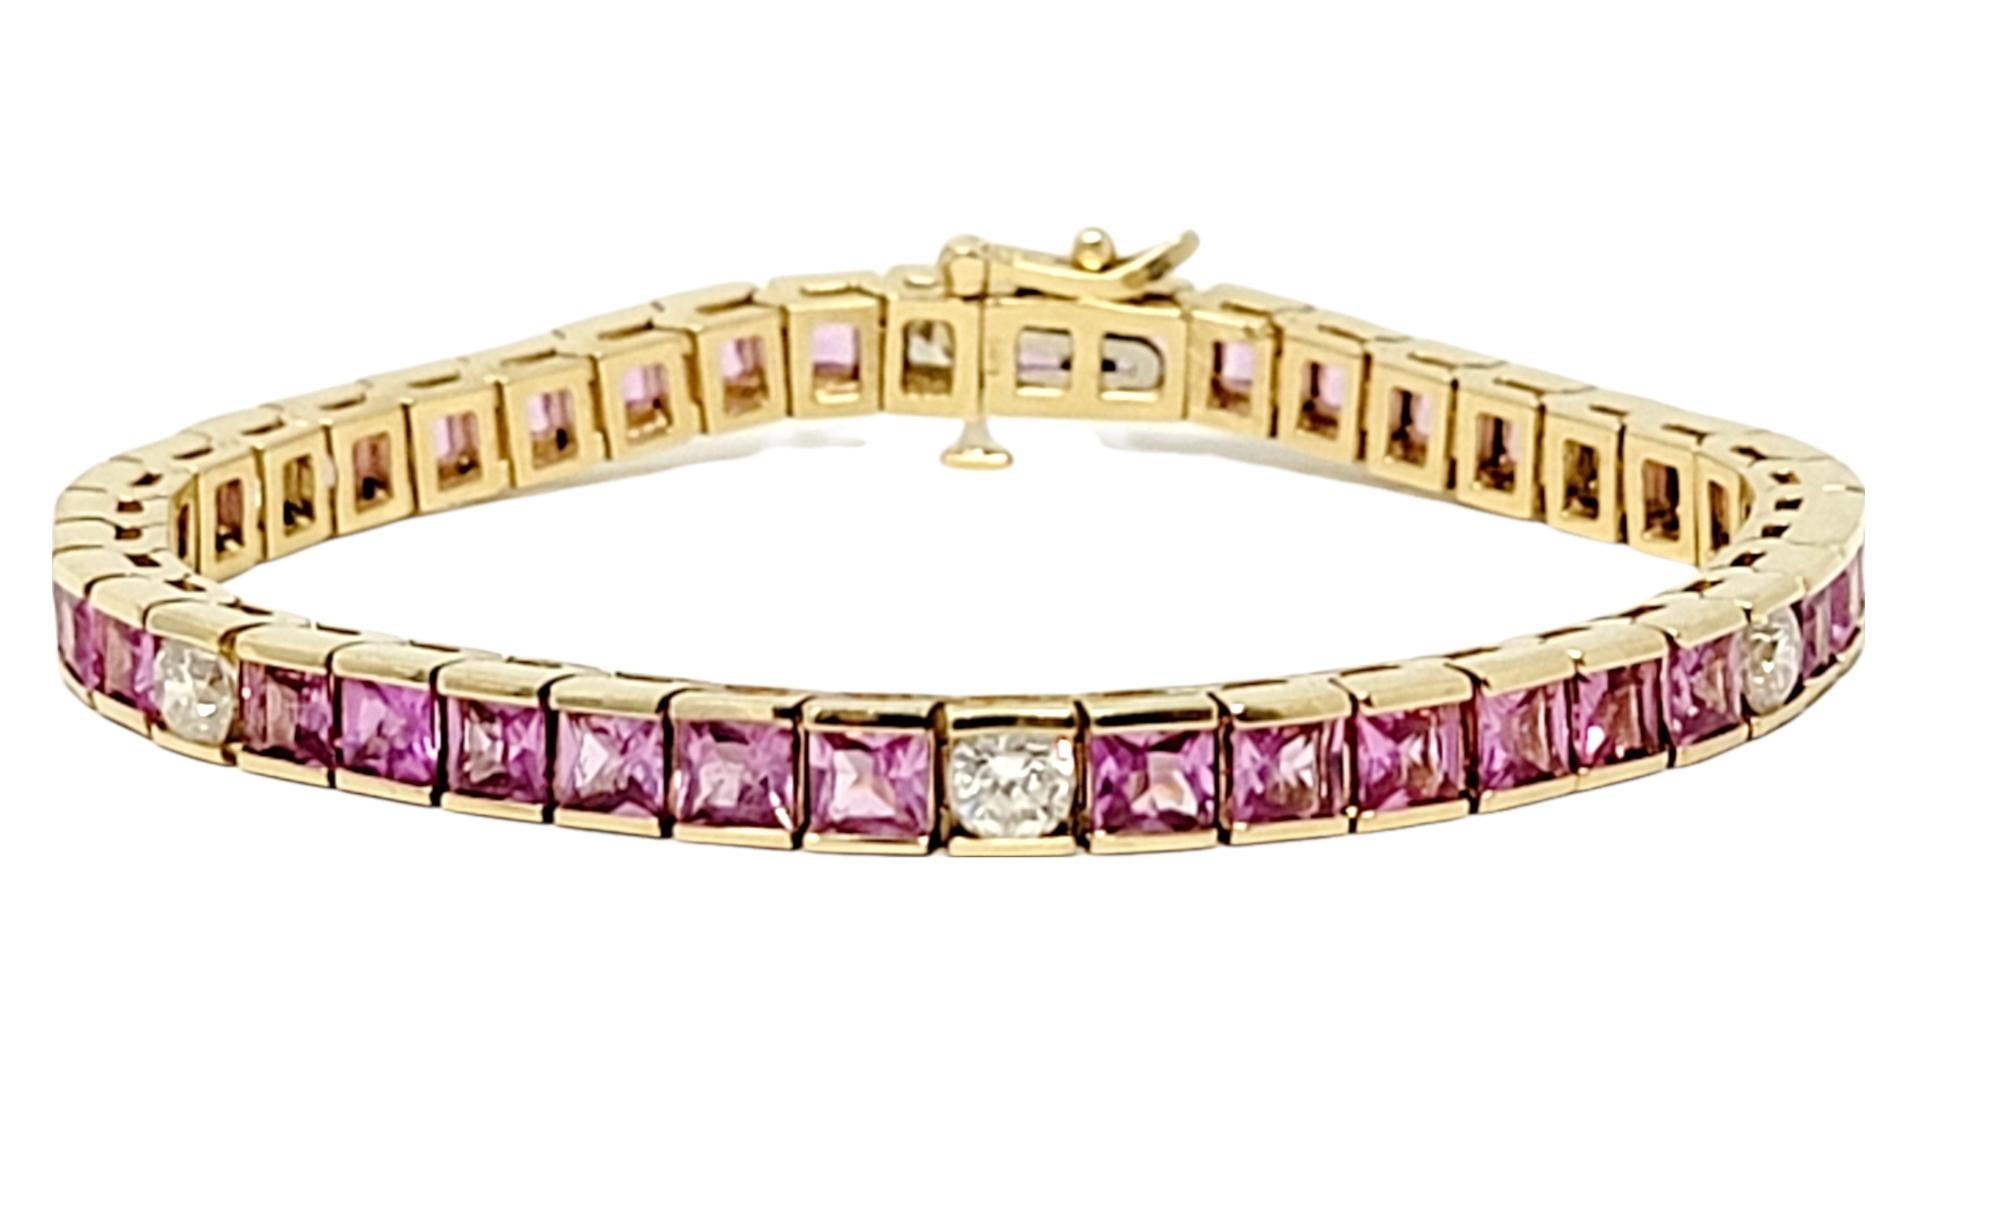 This is an absolutely stunning pink sapphire and diamond tennis bracelet that will take her breath away. The soft, feminine color gives a romantic feel to this stunning, classically designed piece. 36 sparkling square cut pink sapphires are expertly